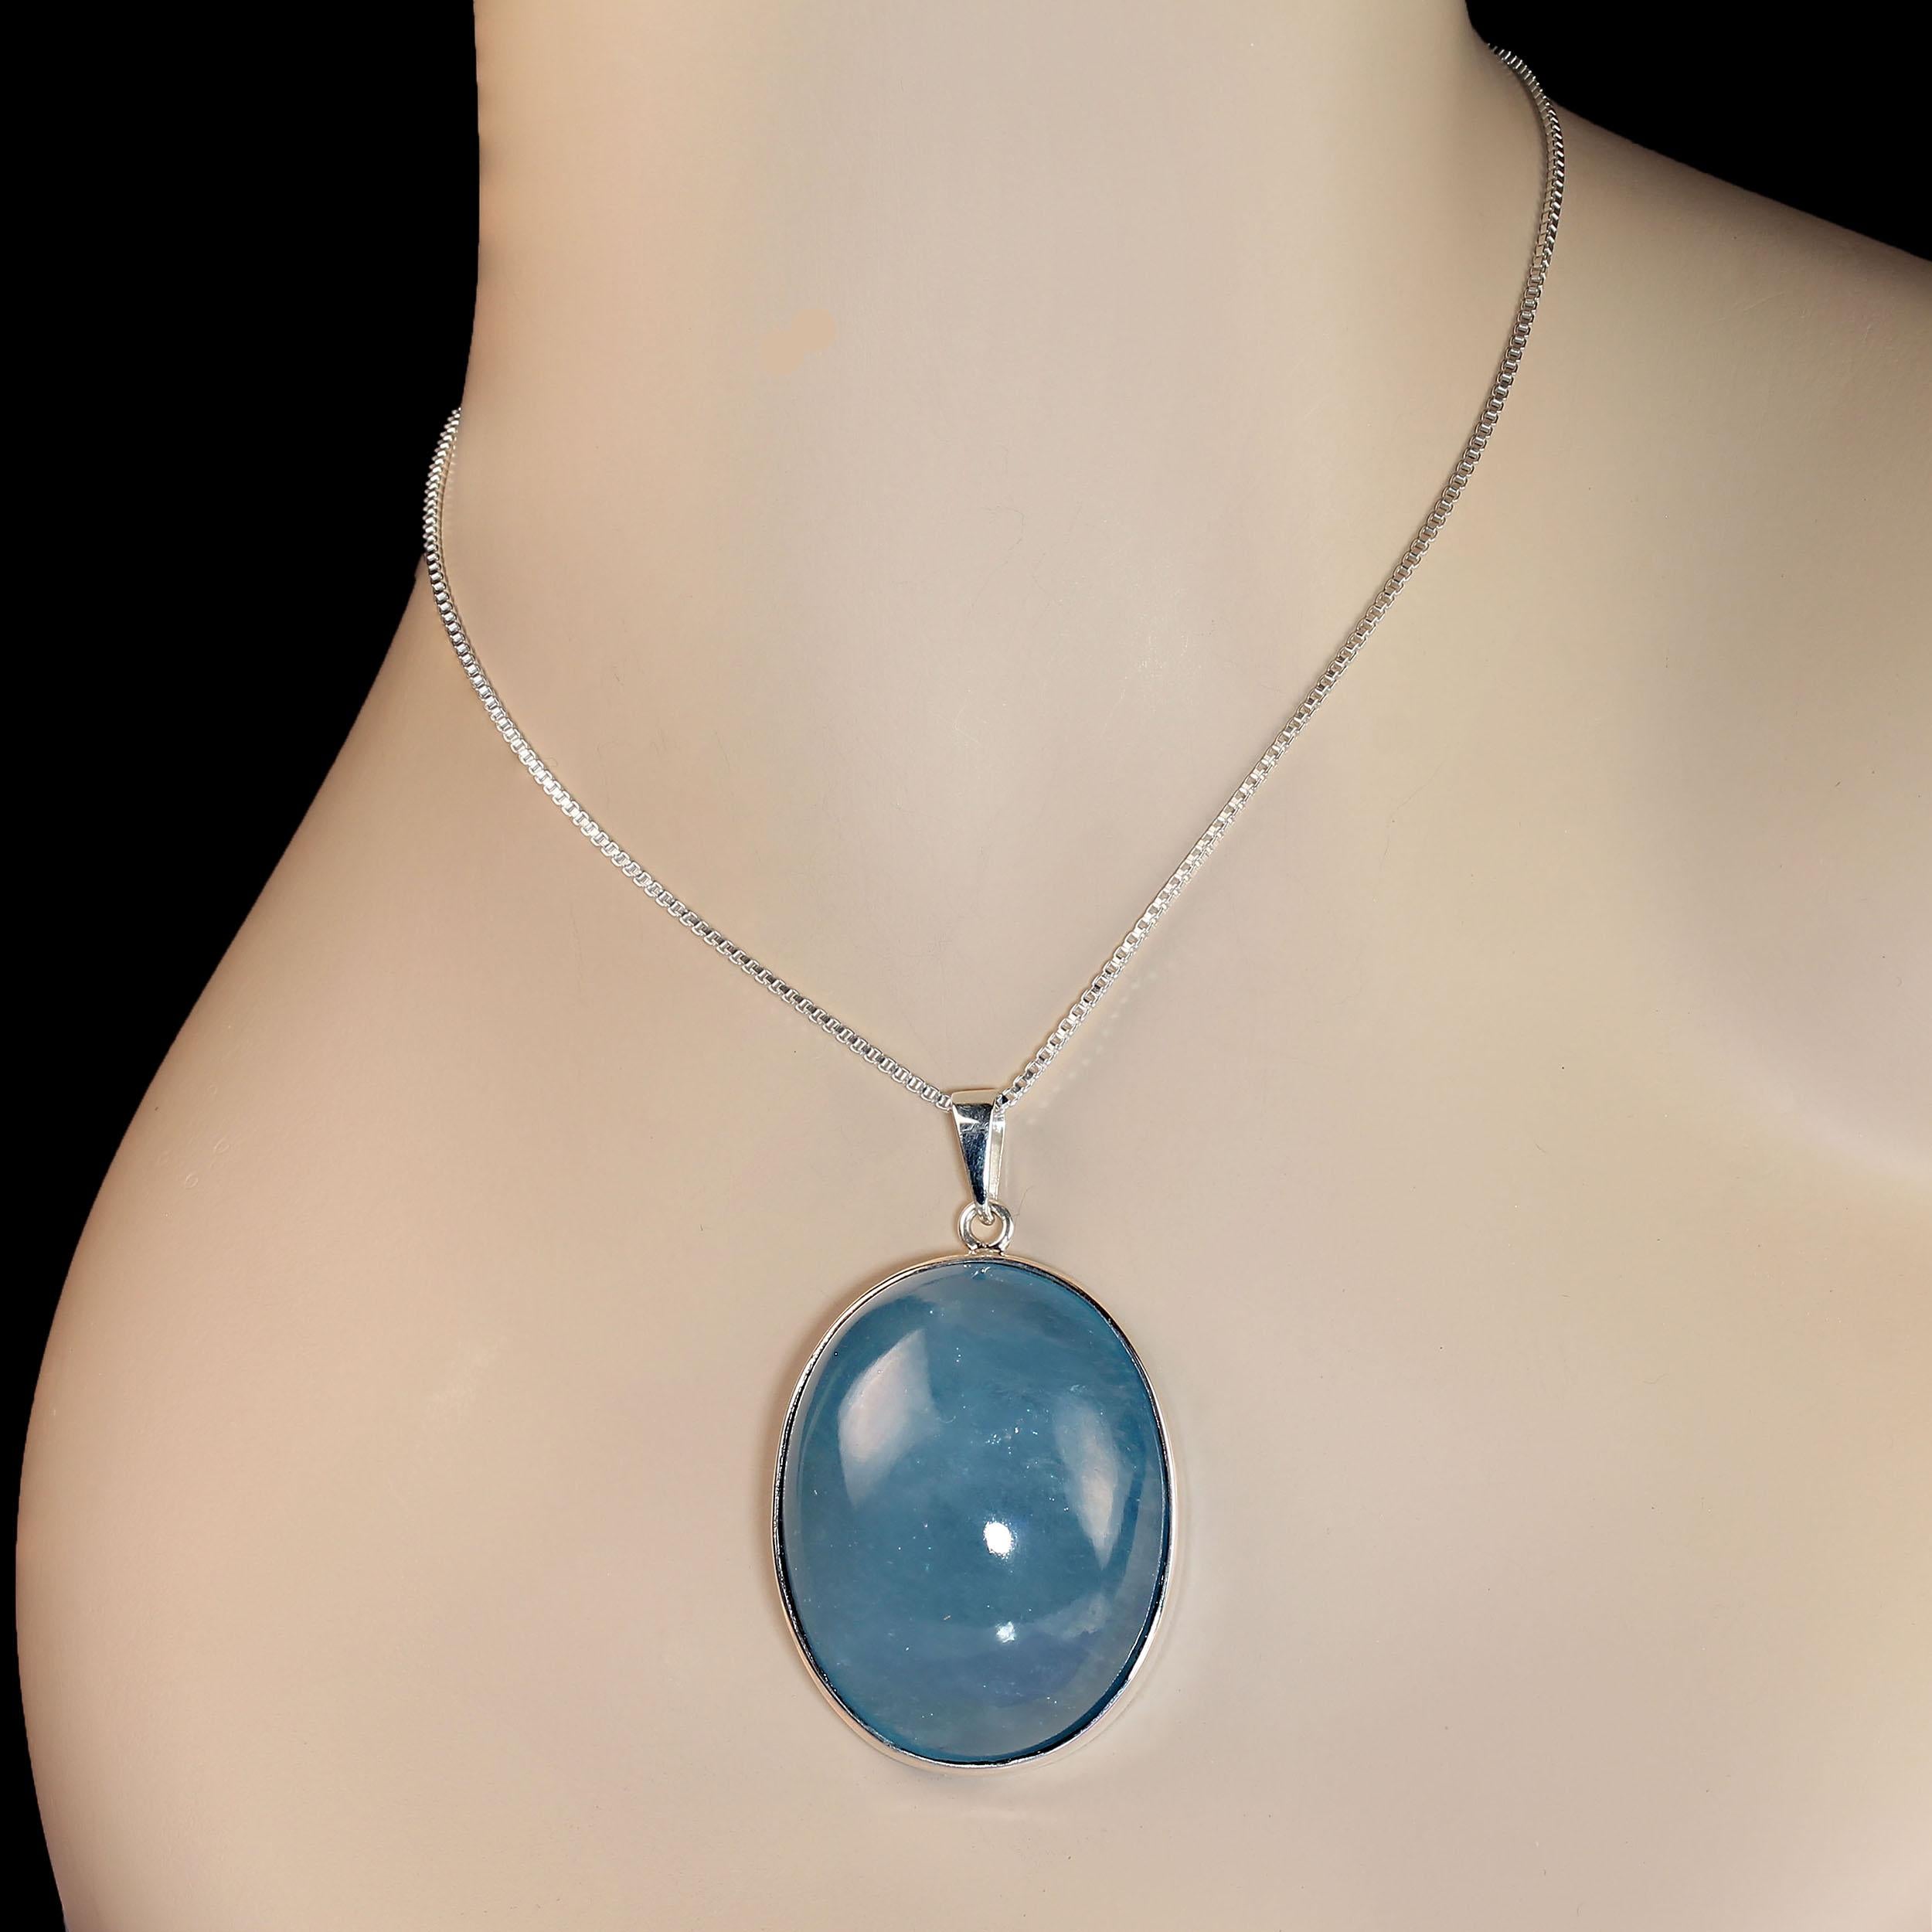 Awesome Aquamarine pendant of 160 carats in Sterling Silver.  This gorgeous 43 X 35 MM cabochon gemstone is something to behold. It is set in its own handmade Sterling Silver bezel setting that was made in Belo Horizonte, Minas Gerais, Brazil. And